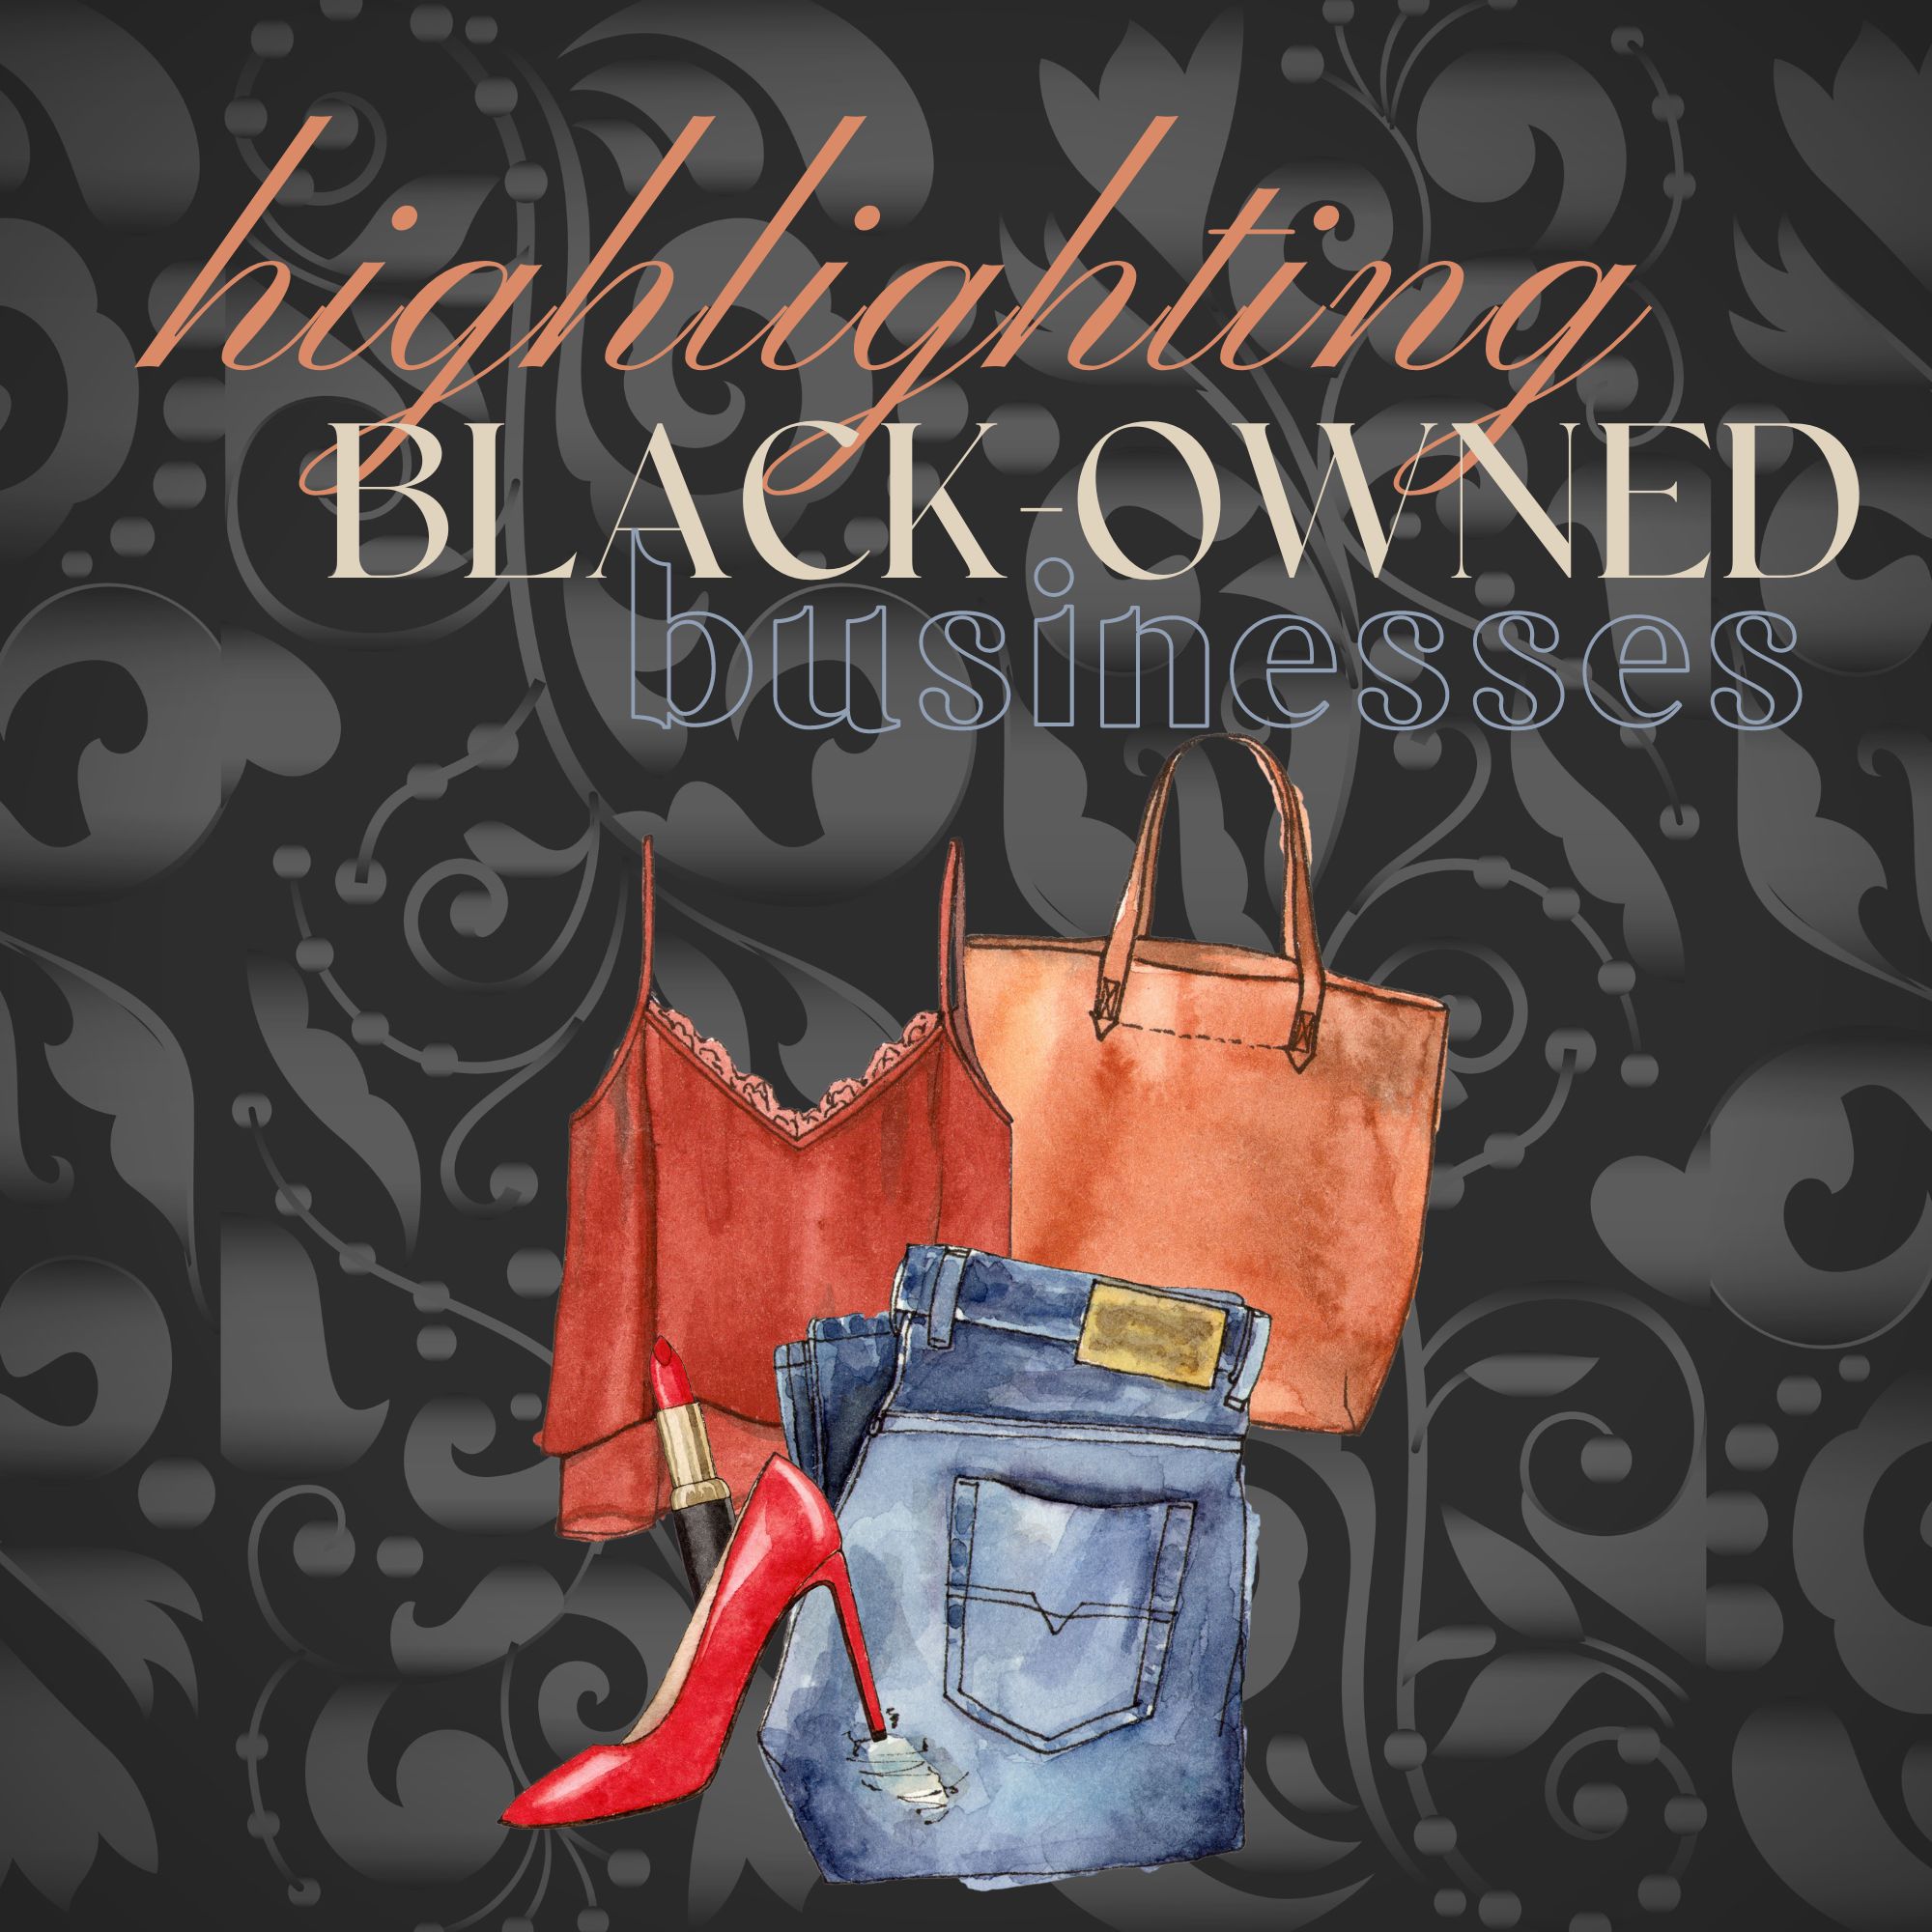 Highlighting Black-Owned Businesses